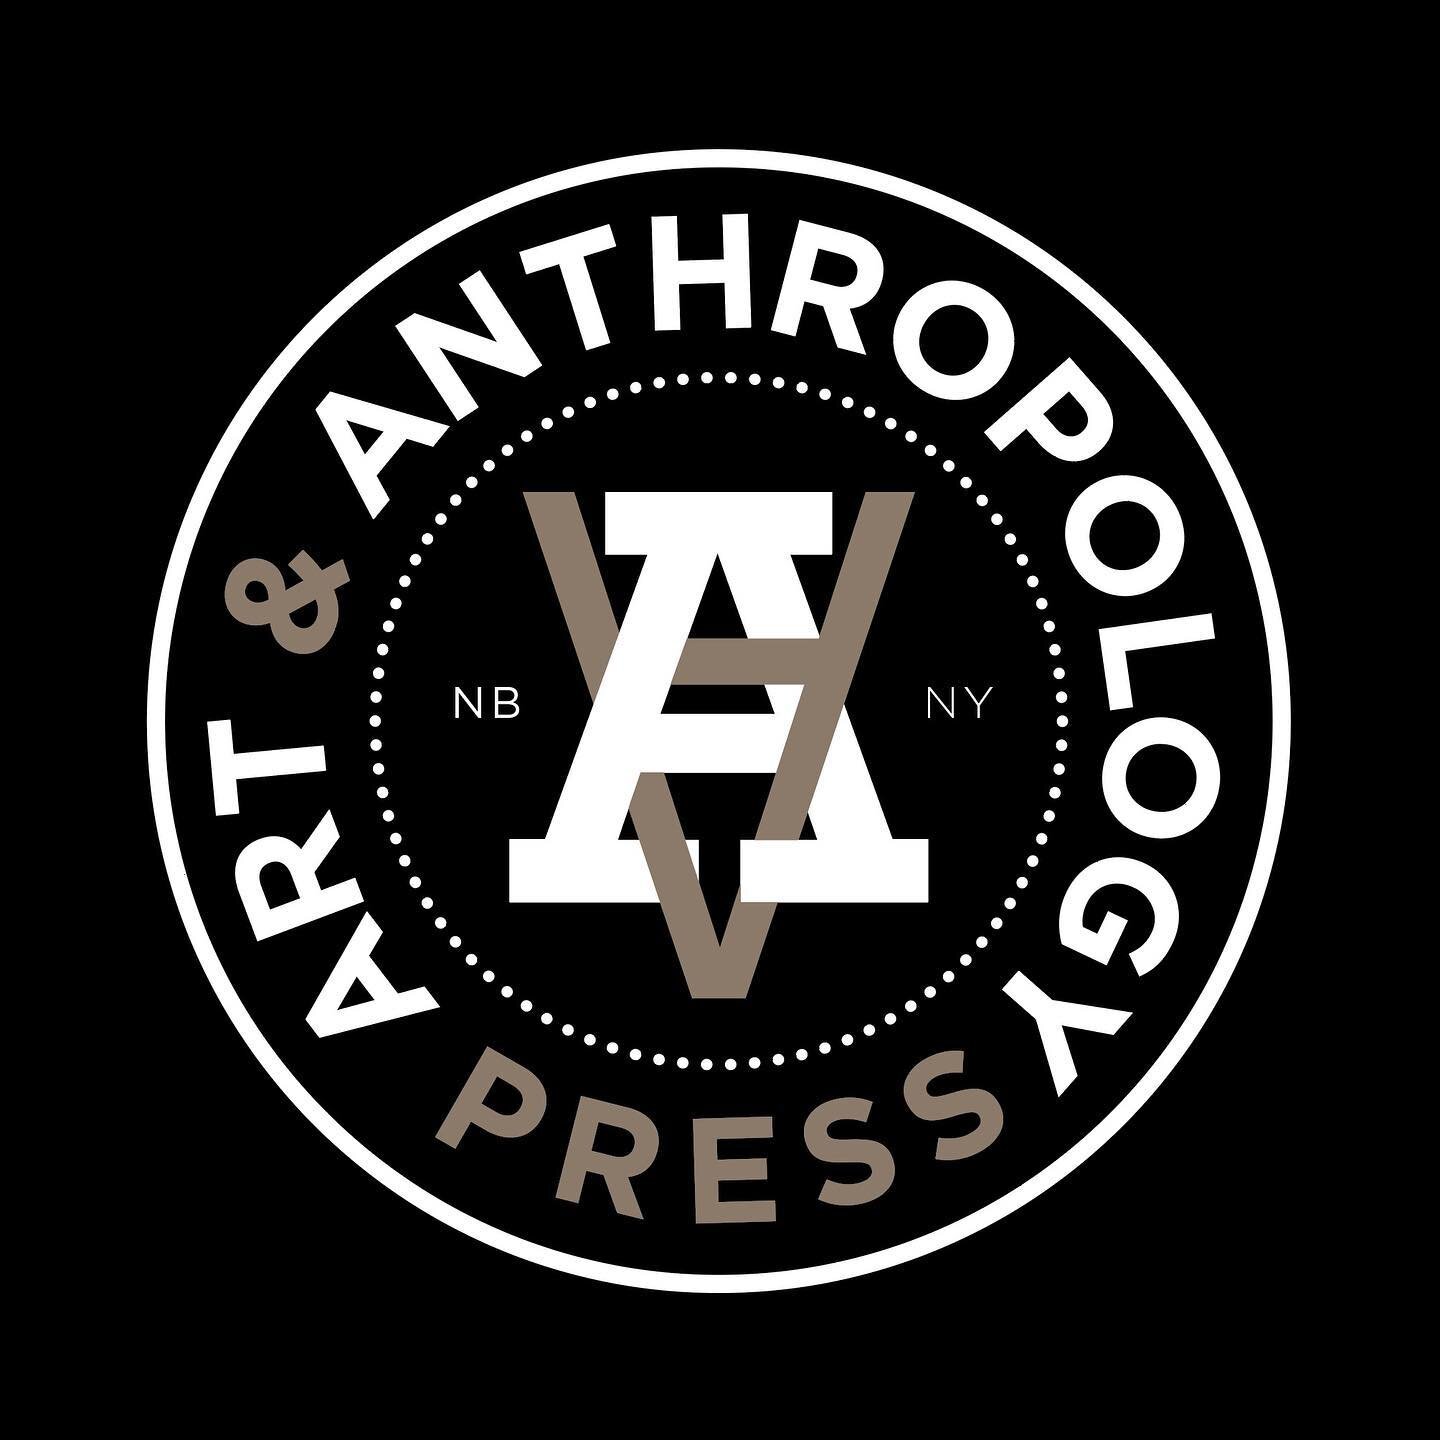 Thrilled to announce the launch of our newest venture, Art &amp; Anthropology Press. A&amp;A Press is the publishing arm of our own studio projects, as well as the collaborative manifestation of our work with other artists, authors, entrepreneurs, an